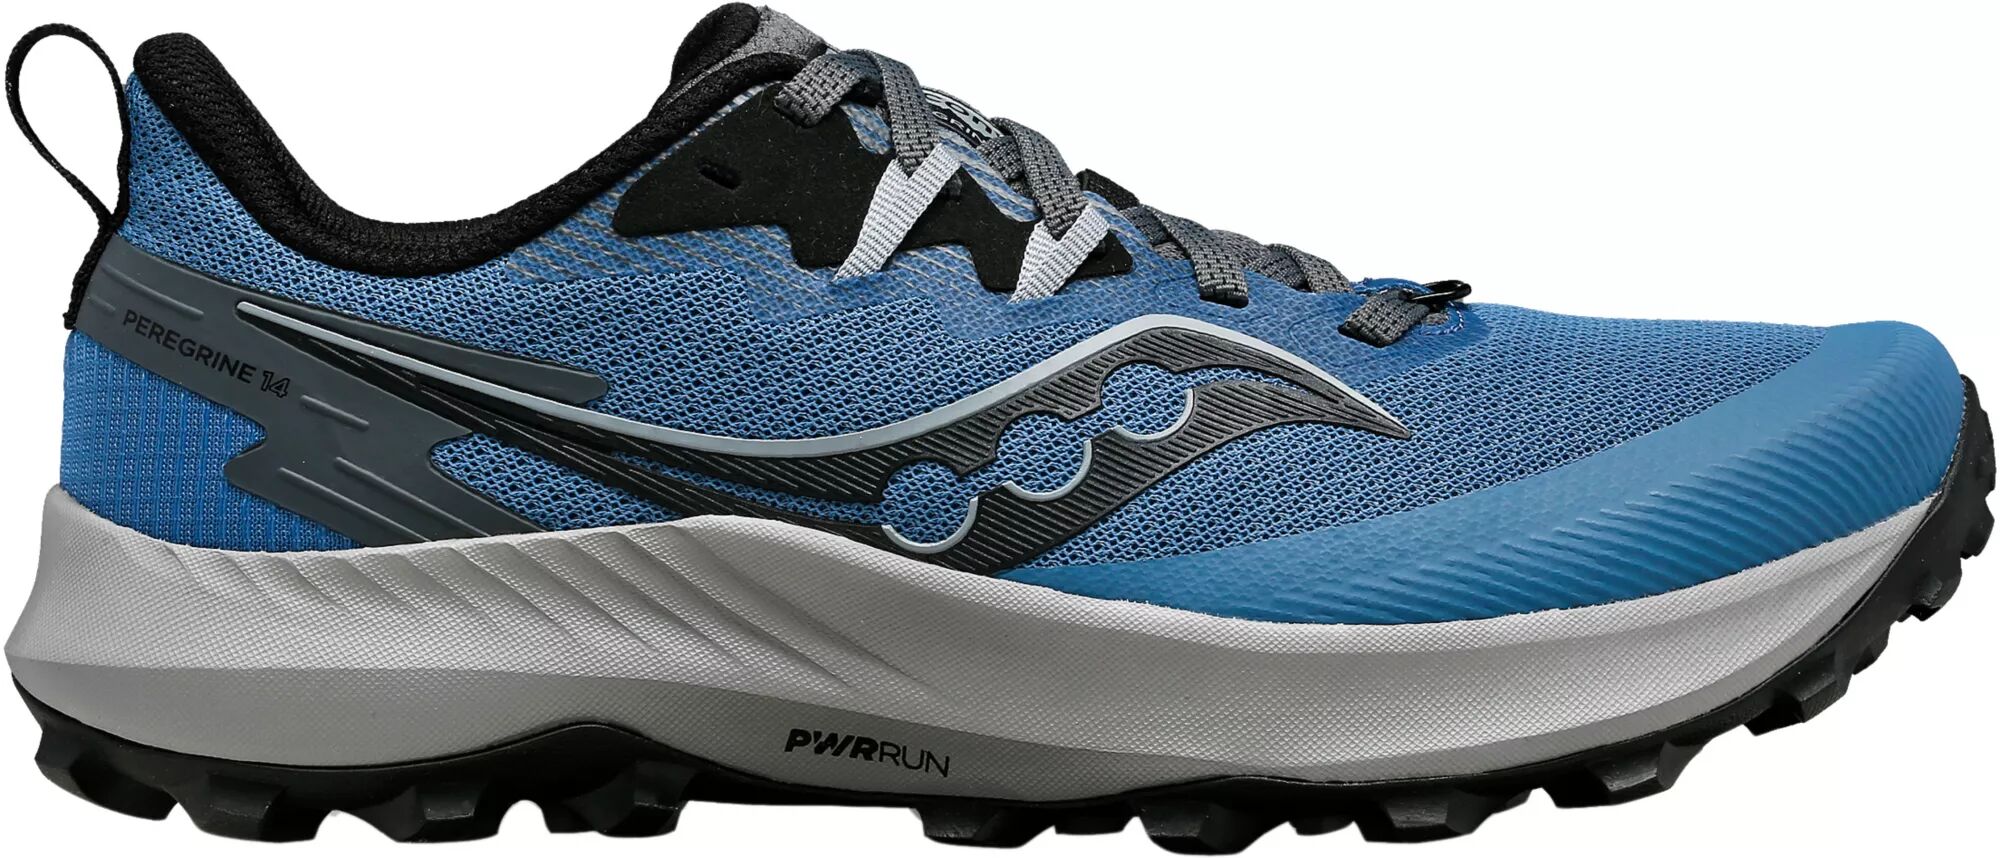 Saucony Women's Peregrine 14 Trail Running Shoes, Size 9, Blue/Grey